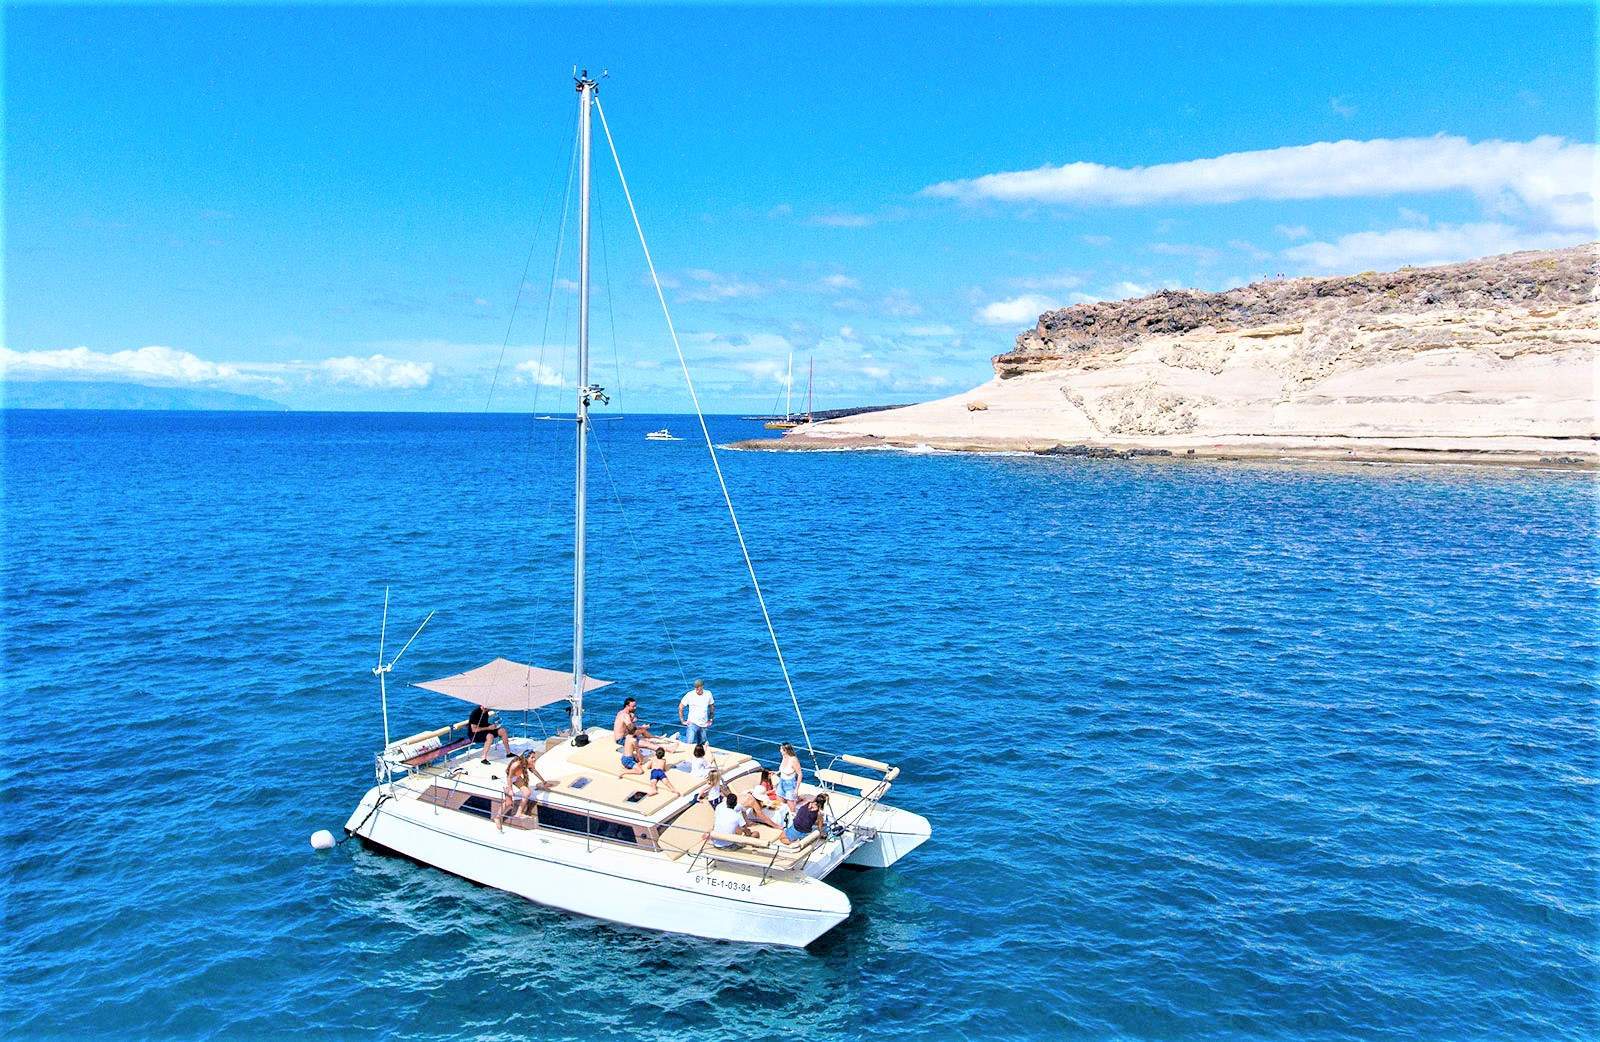 Shared catamaran excursion in Puerto Colon, with a maximum of 11 people.